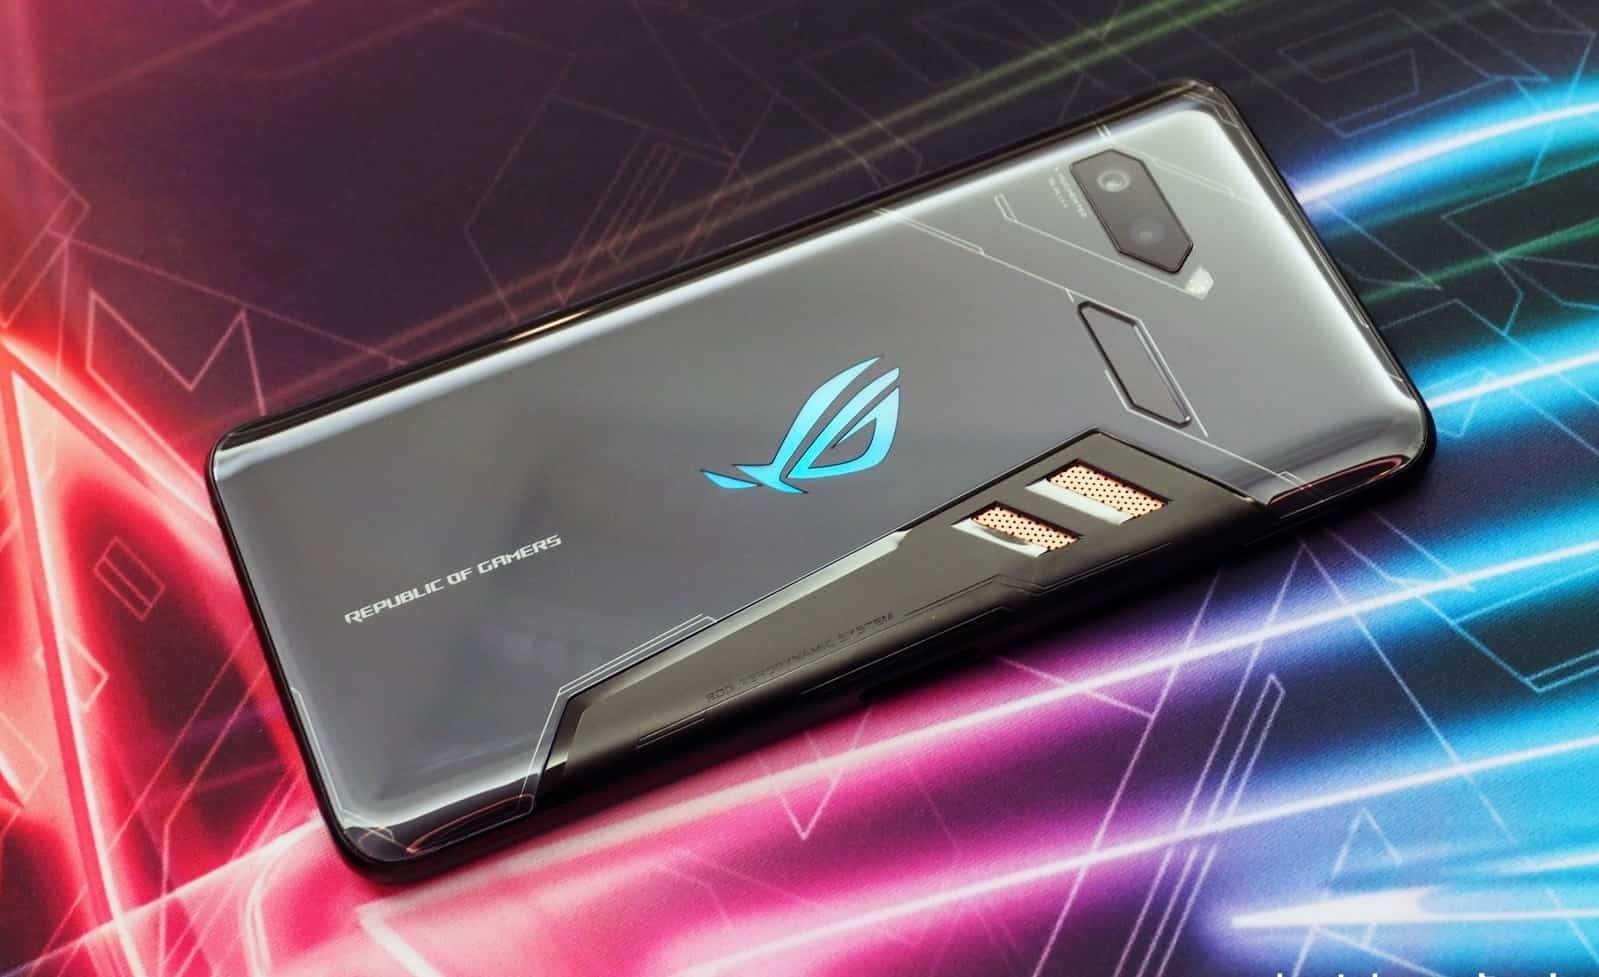 ASUS ROG hands-on: The new gaming phone with AMAZING 8GB RAM!